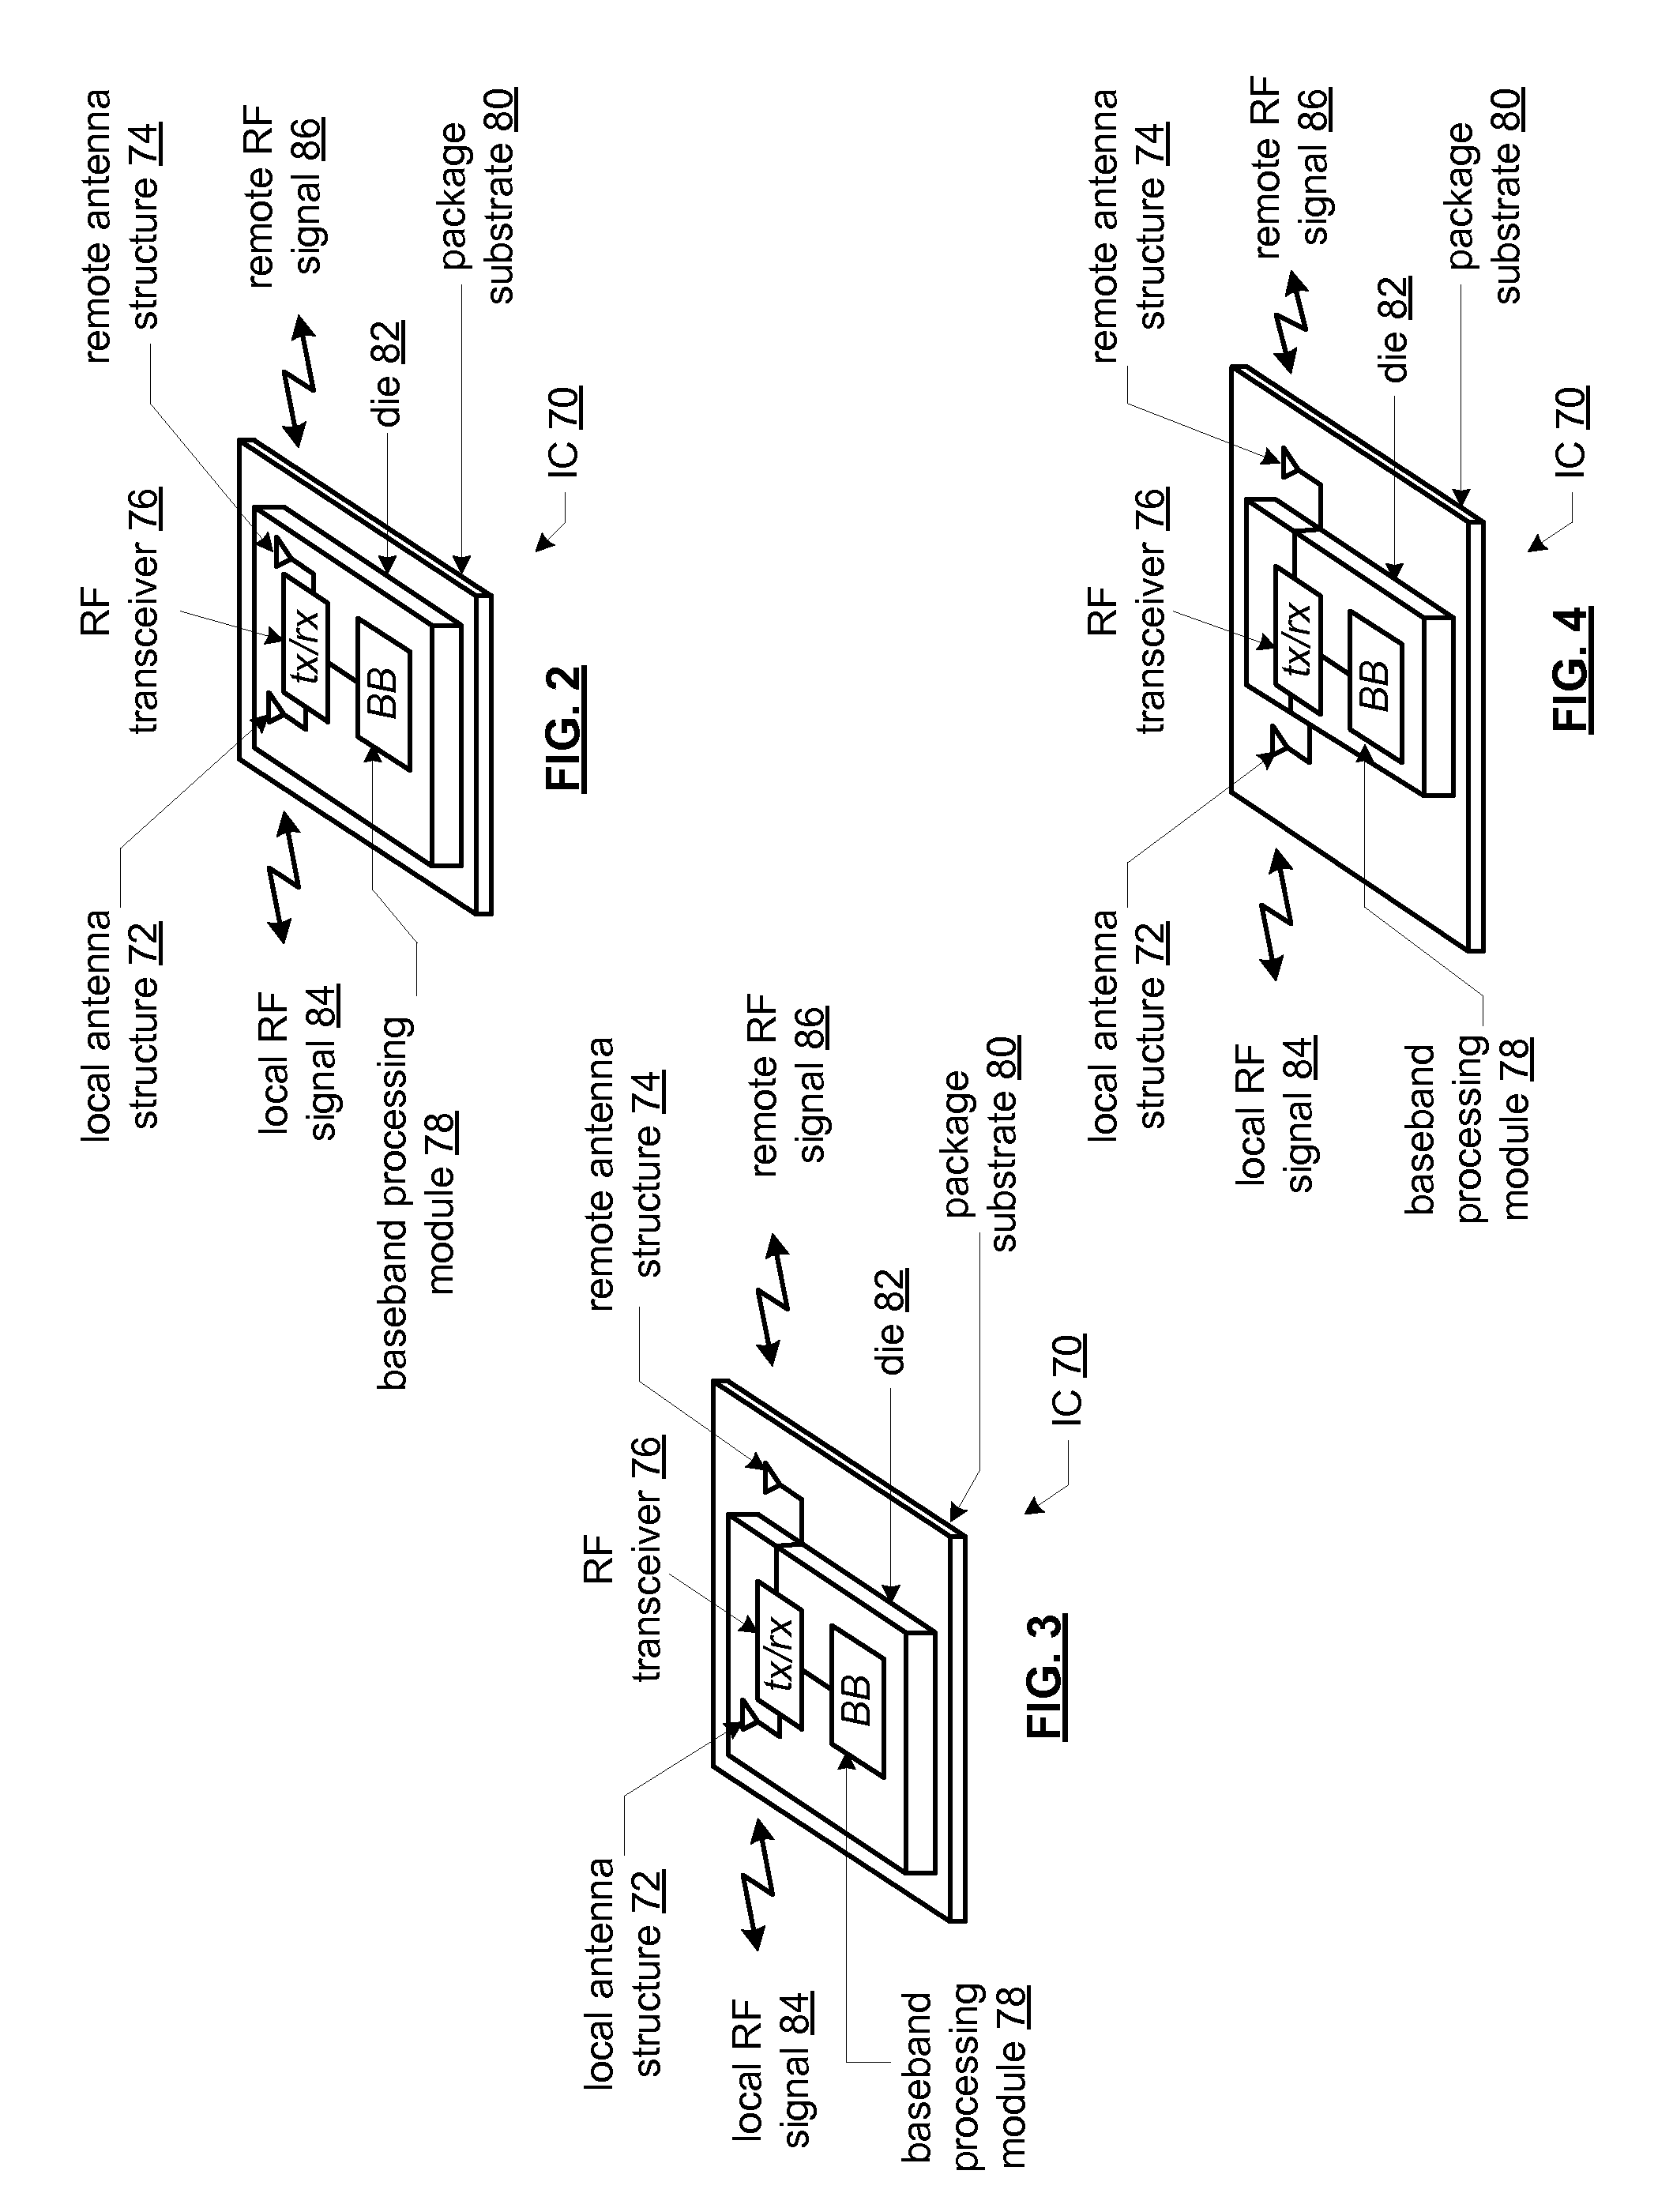 RFID integrated circuit with integrated antenna structure